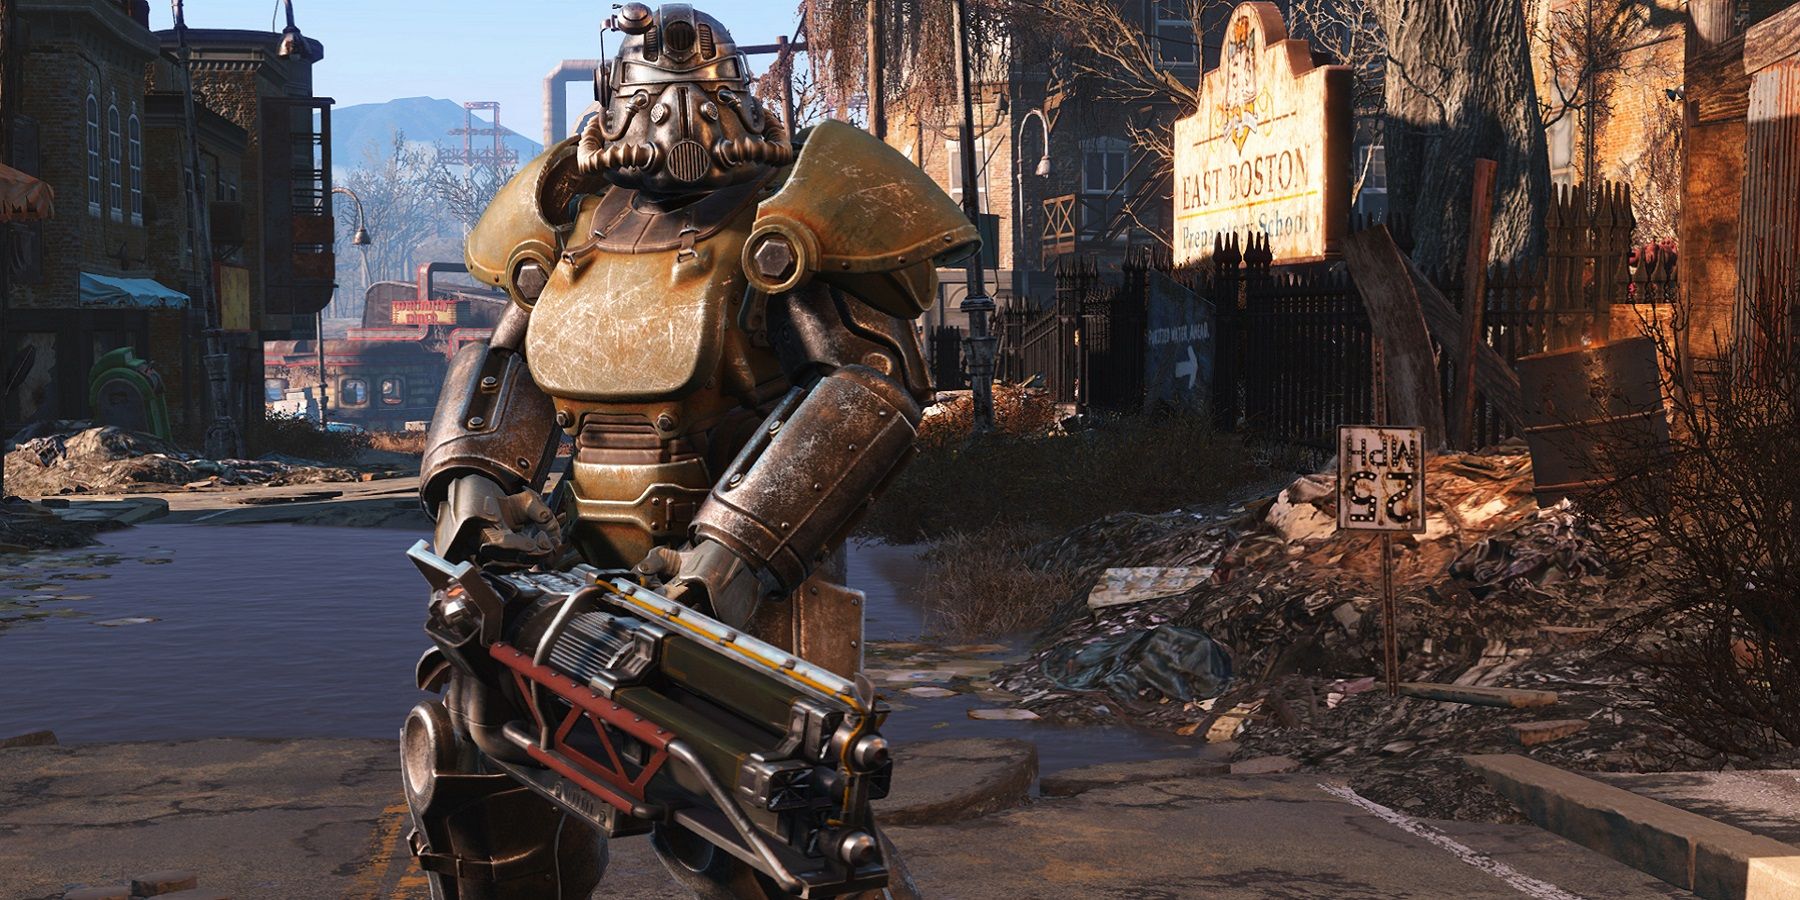 Screenshot from Fallout 4 showing a member of the Brotherhood of Steel holding a gatling laser.